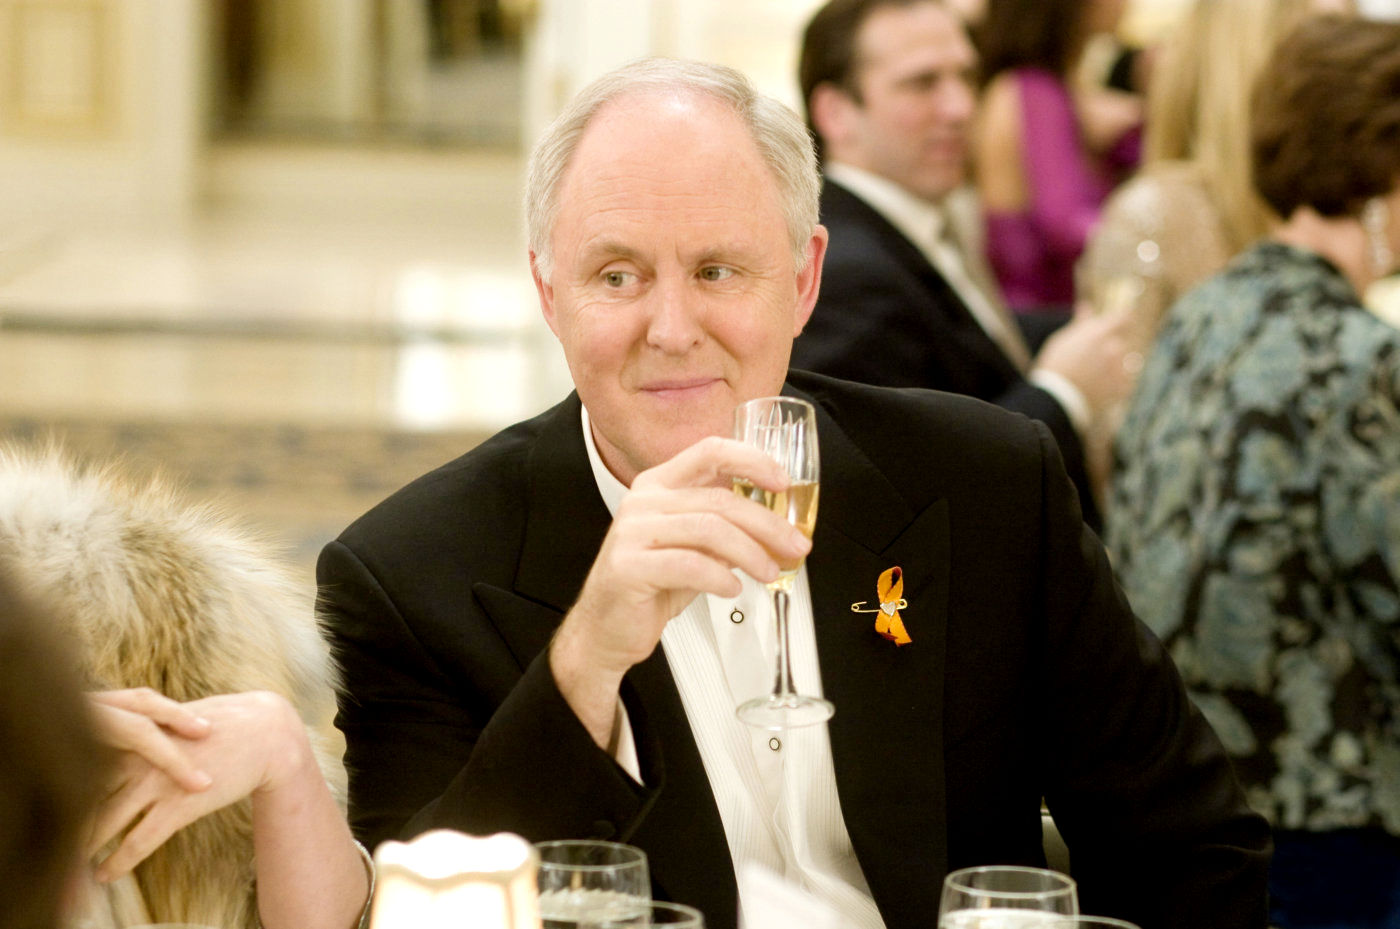 John Lithgow in Walt Disney Pictures' Confessions of a Shopaholic (2009)